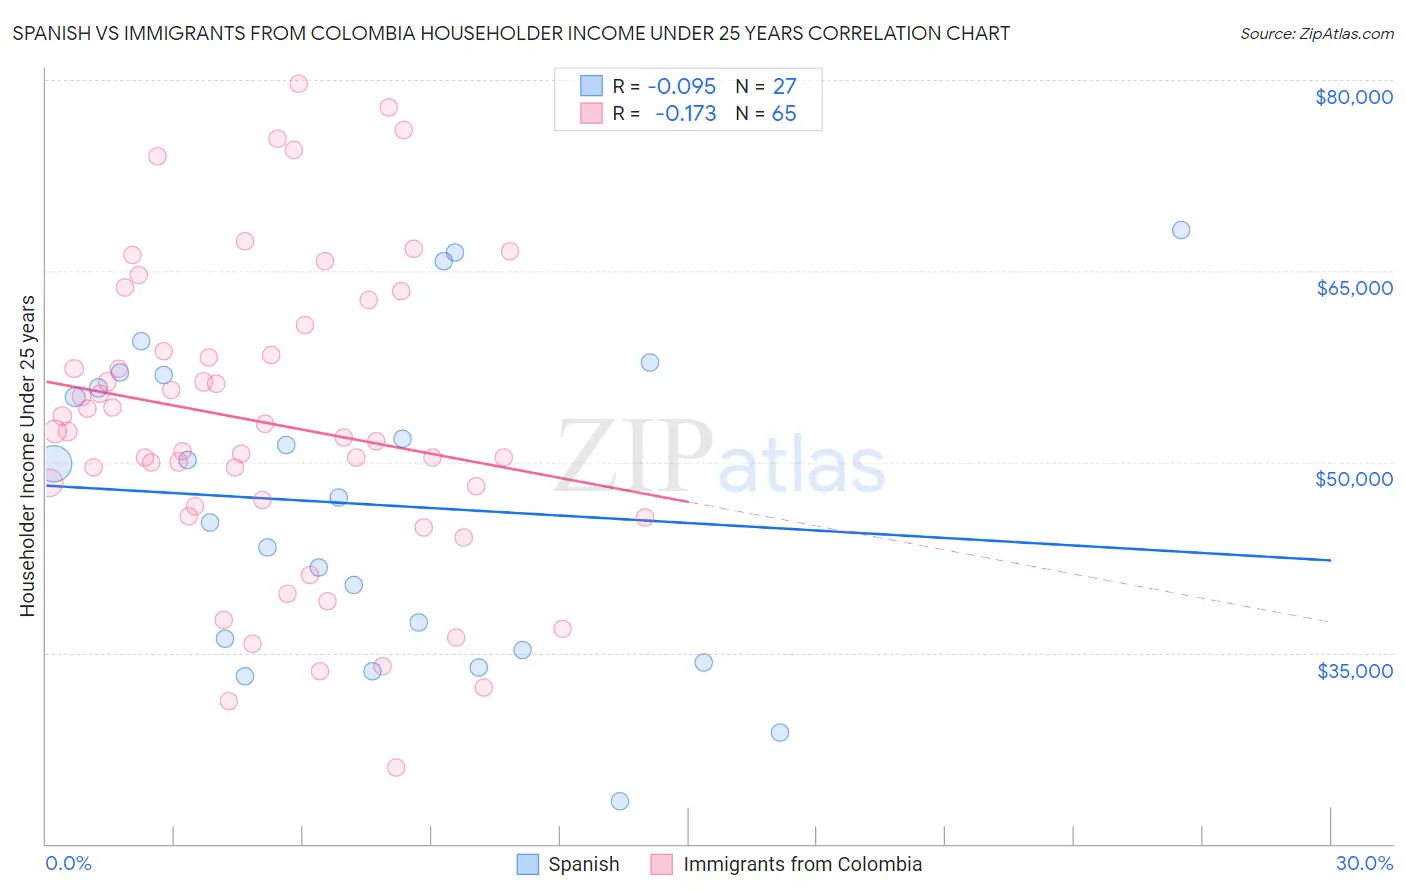 Spanish vs Immigrants from Colombia Householder Income Under 25 years